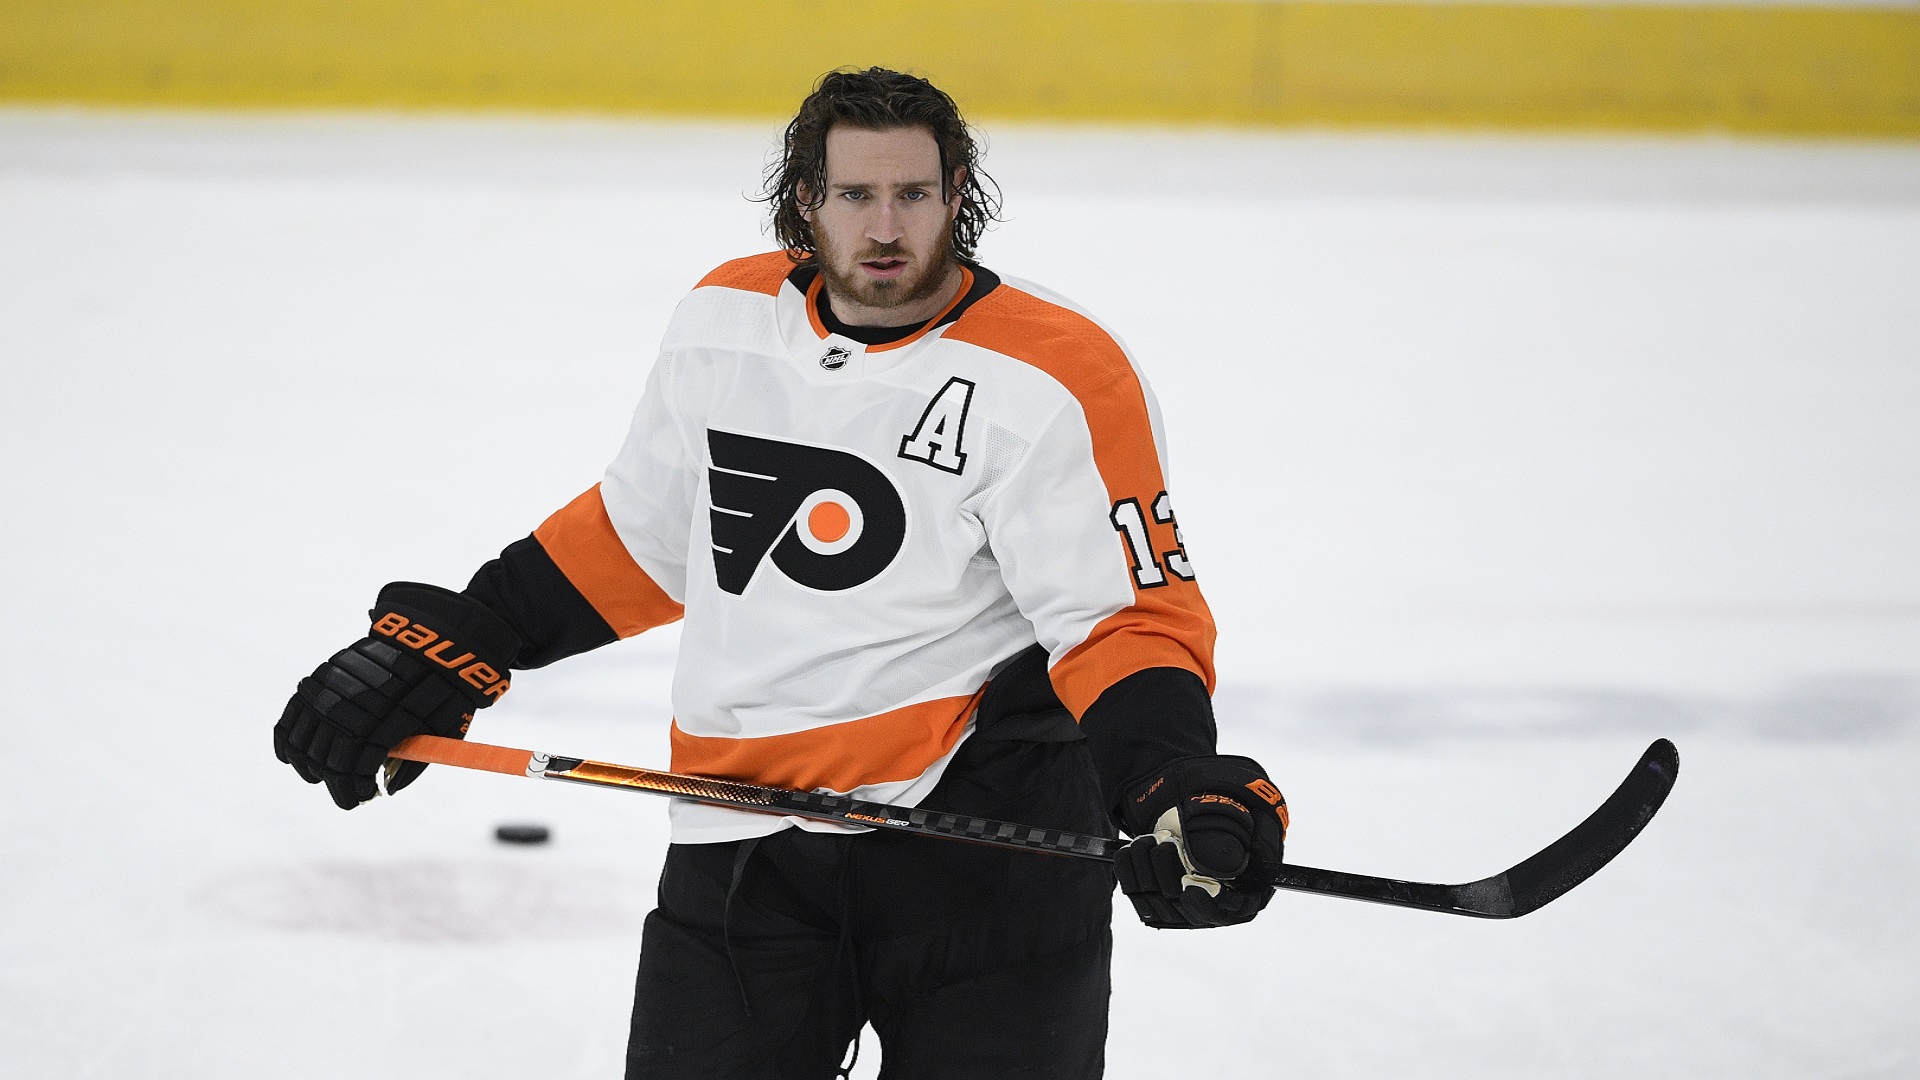 Flyers season preview: Healthy Couturier, Atkinson could provide spark